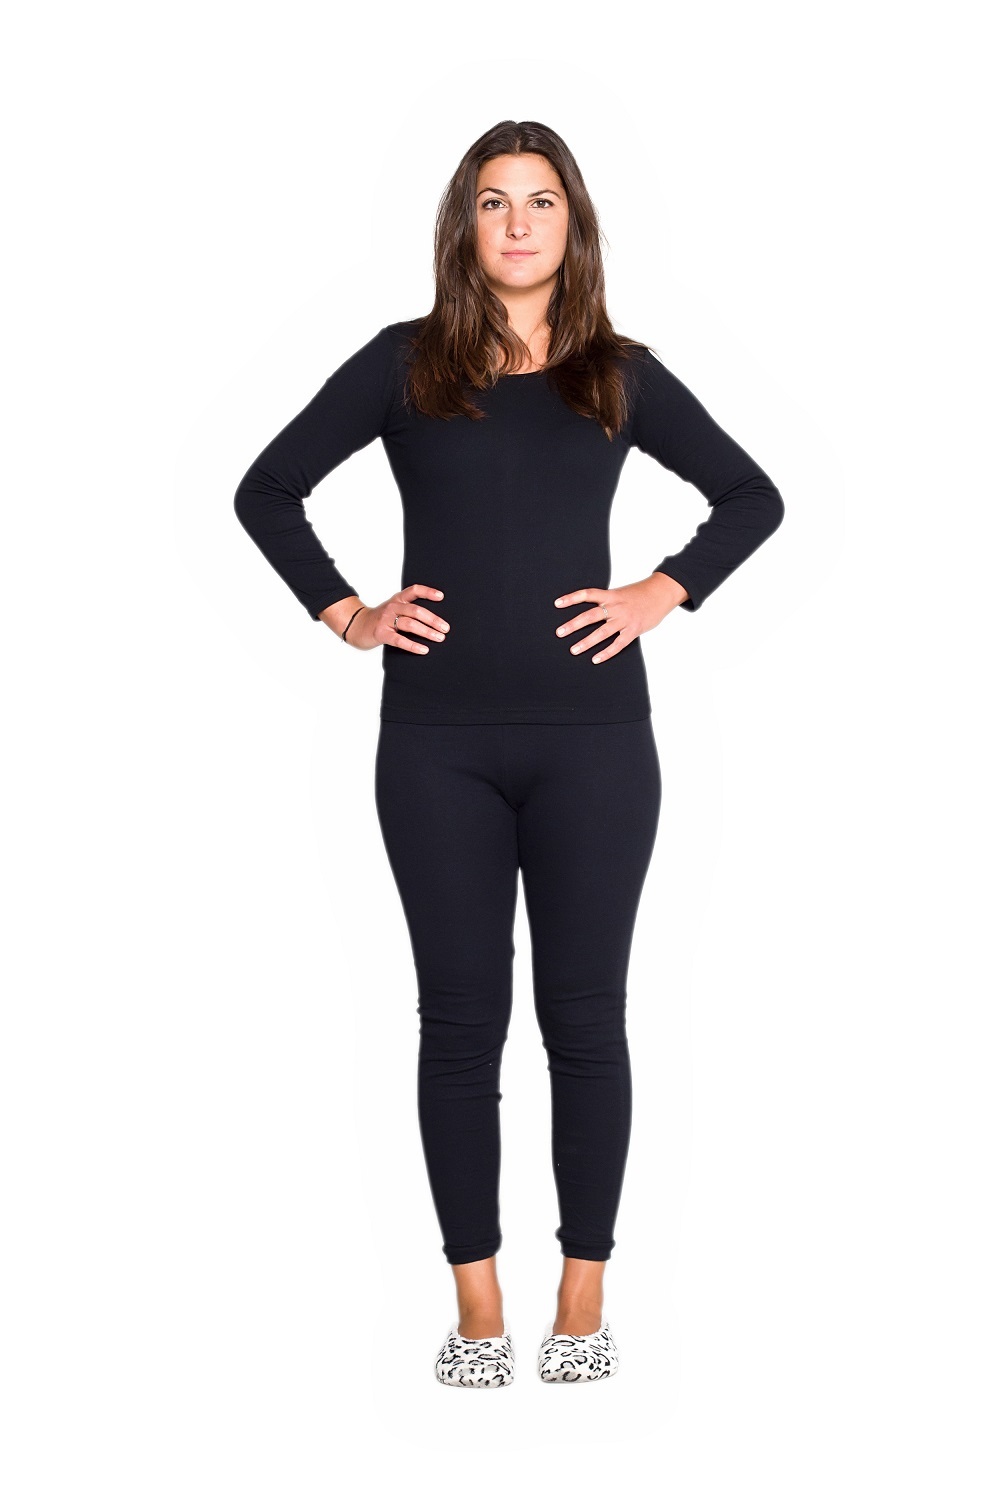 Buy Tog 24 Snowdon Womens Thermal Leggings from the Next UK online